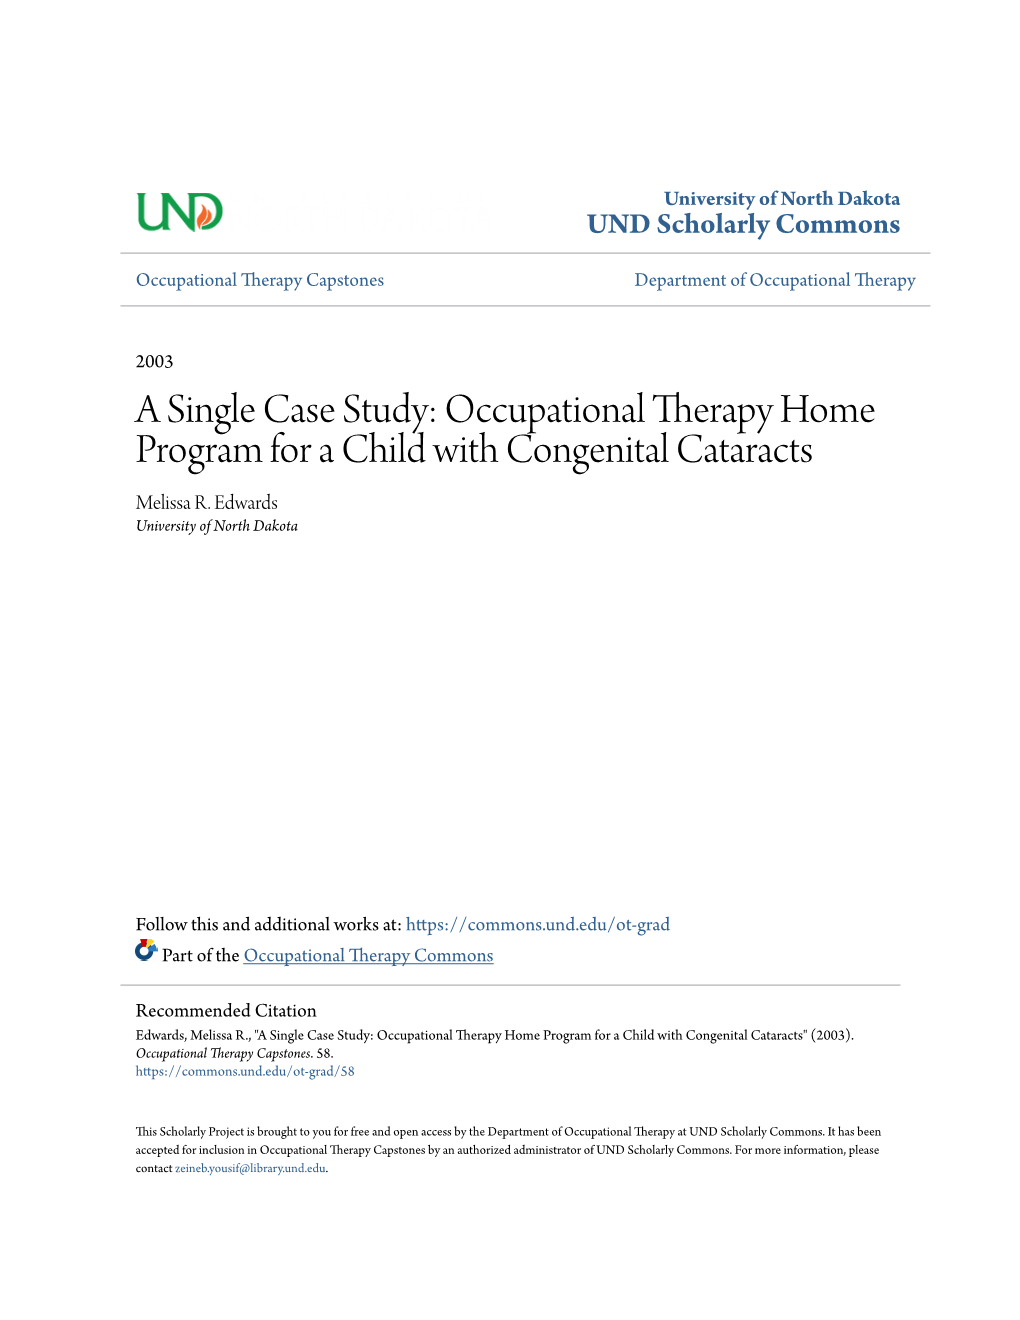 Occupational Therapy Home Program for a Child with Congenital Cataracts Melissa R